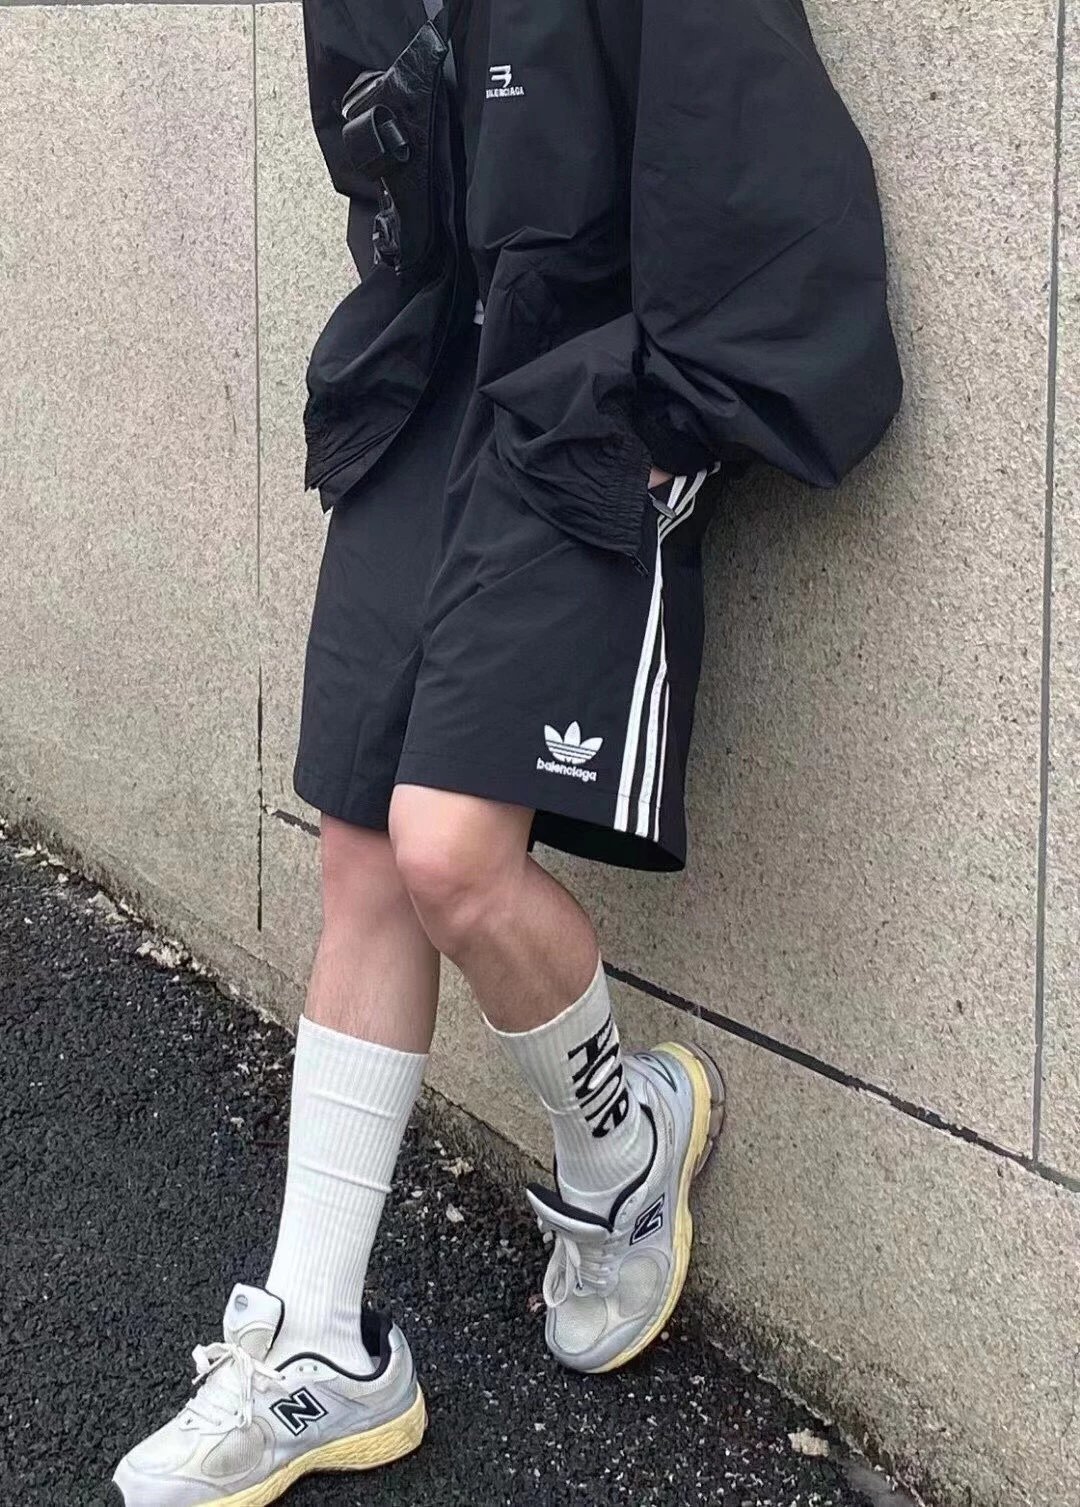 Item Thumbnail for 9000 Balenciaga X Adidas originals SS23 shorts
Balenciaga× Adidas blockbuster joint collection!! Woven fabrics
Clover three-bar sports shorts with active black color scheme unisex and unisex width
Loose fit
- Craft said